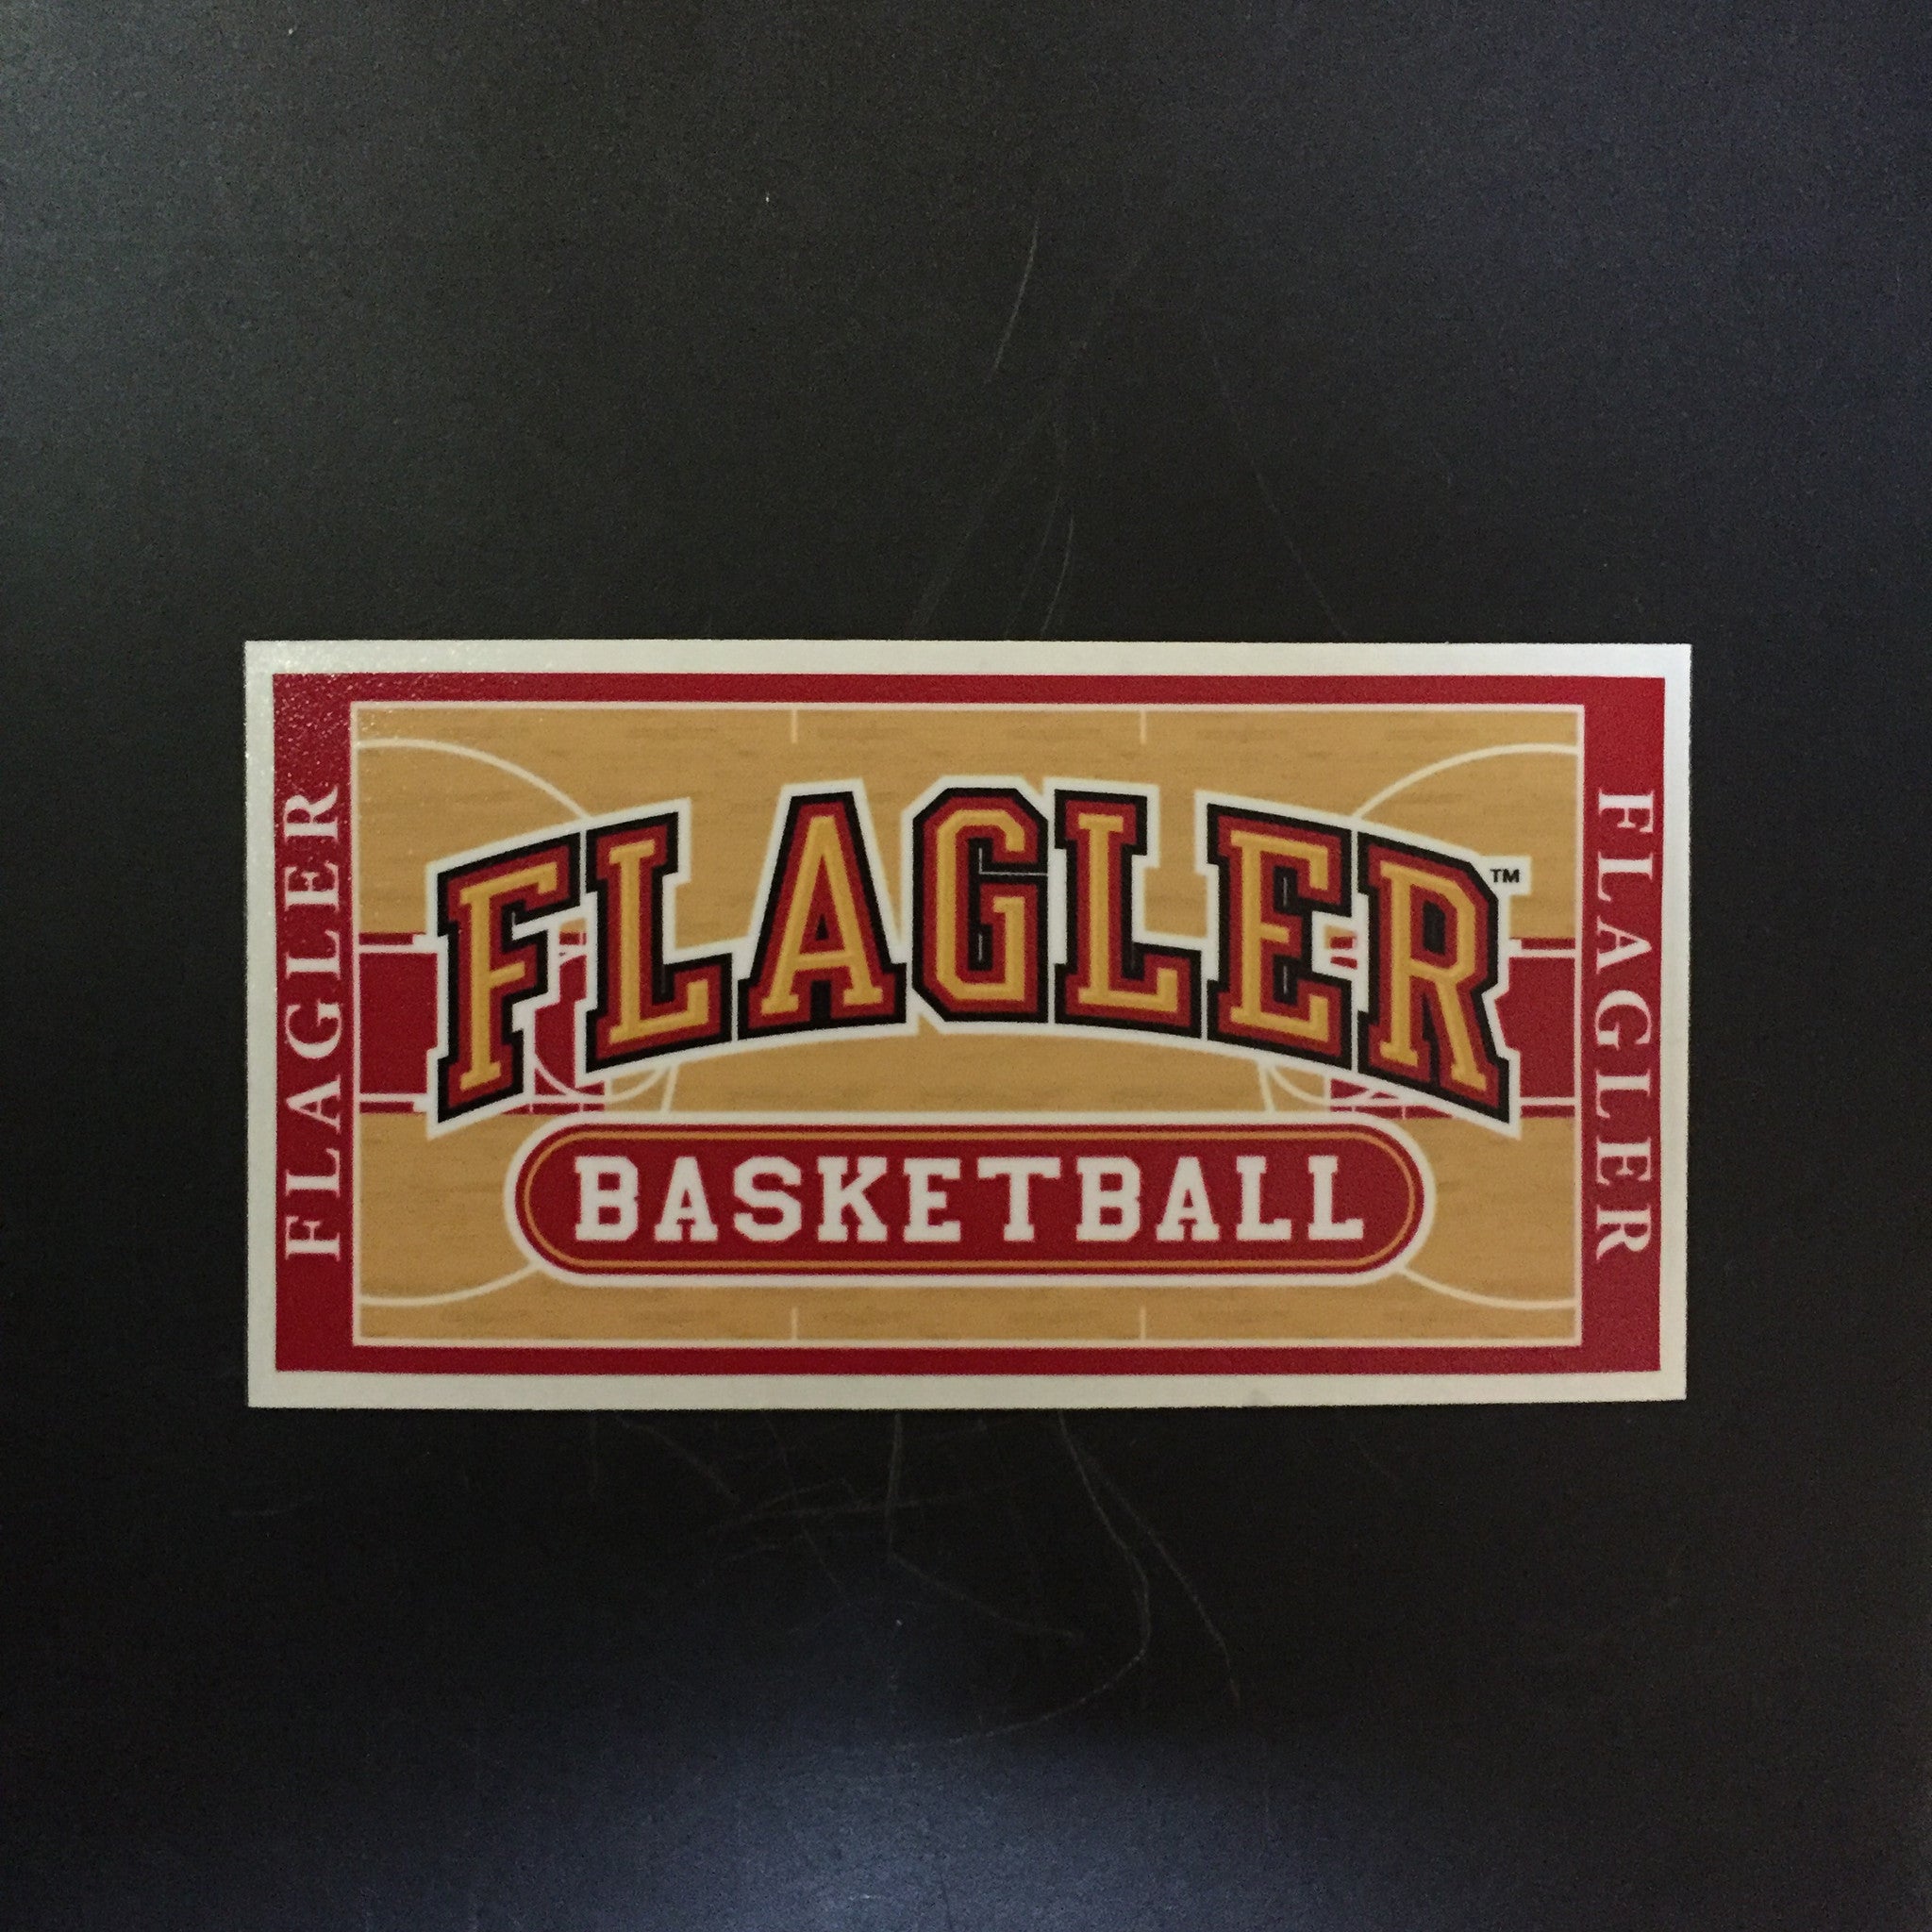 basketball court decal with Flagler written in gold and basketball written in white in red oval